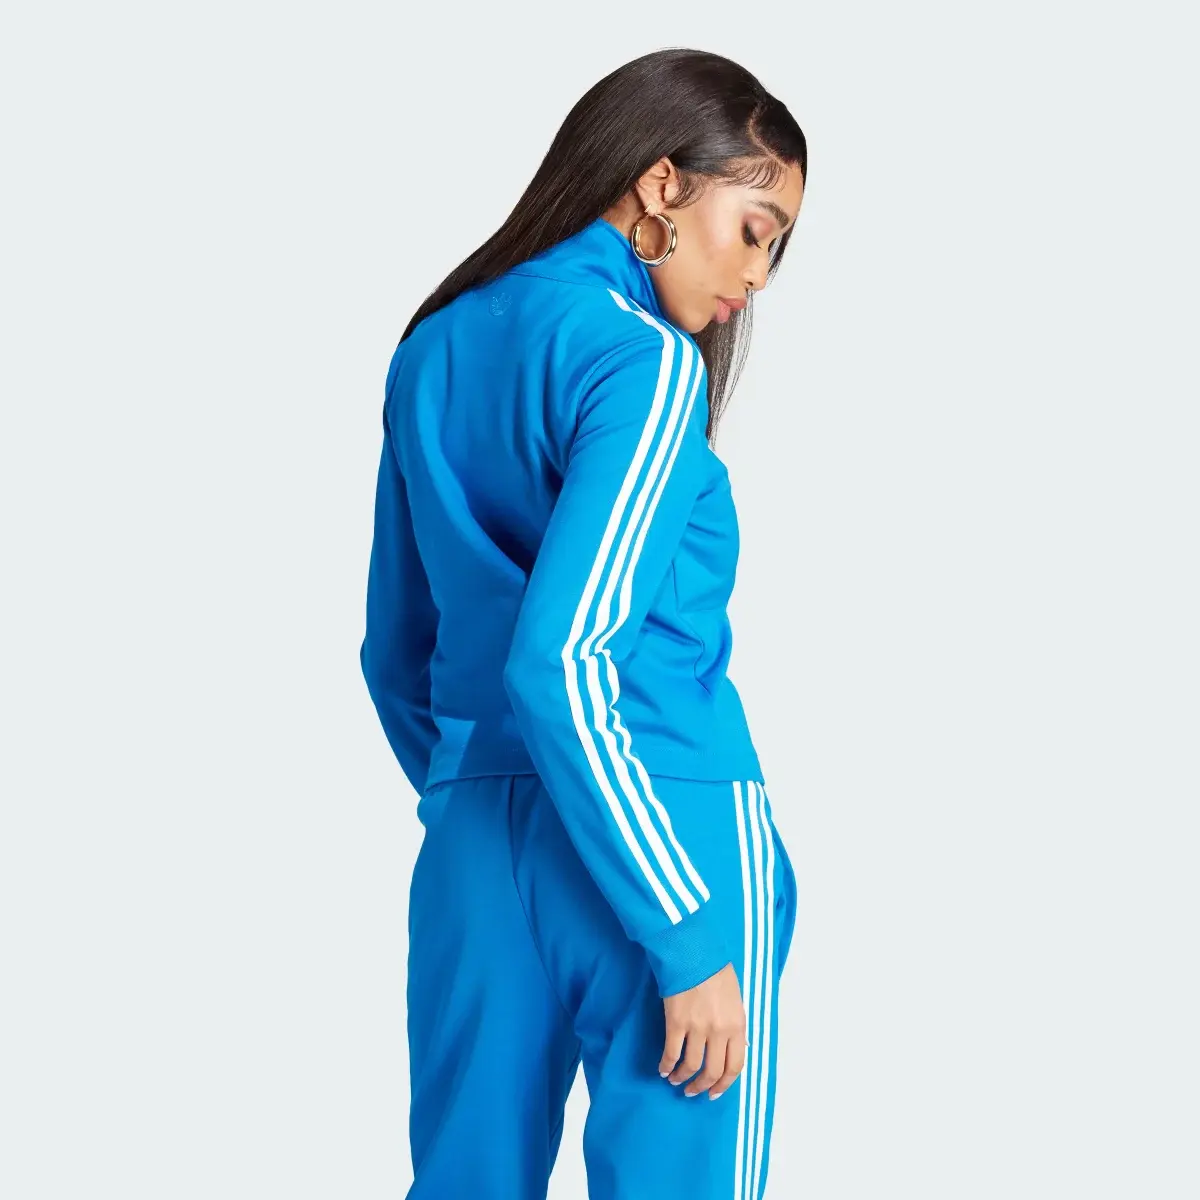 Adidas Track top Blue Version Montreal. 3